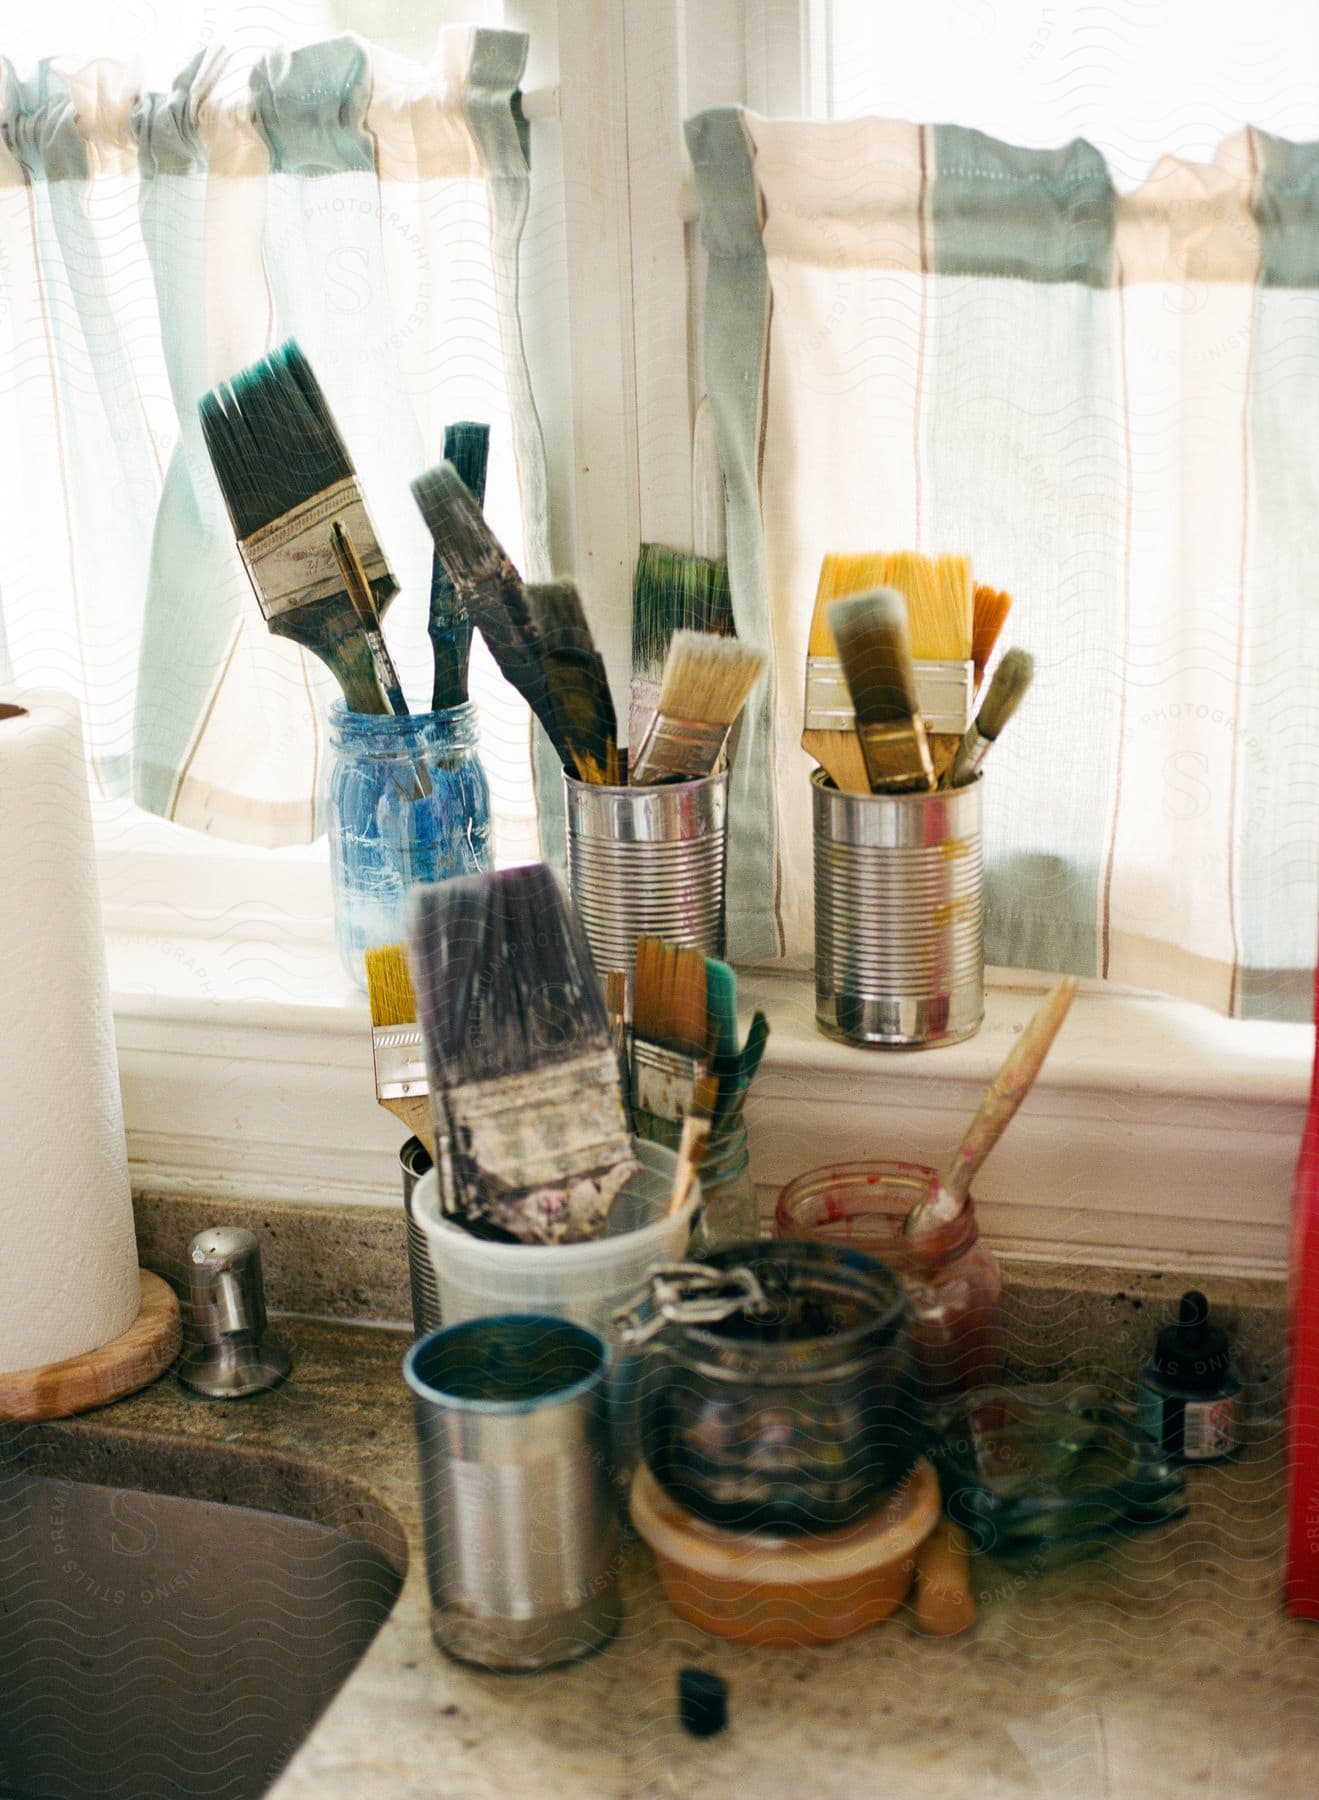 paint brushes are placed in cans and tin close to the window